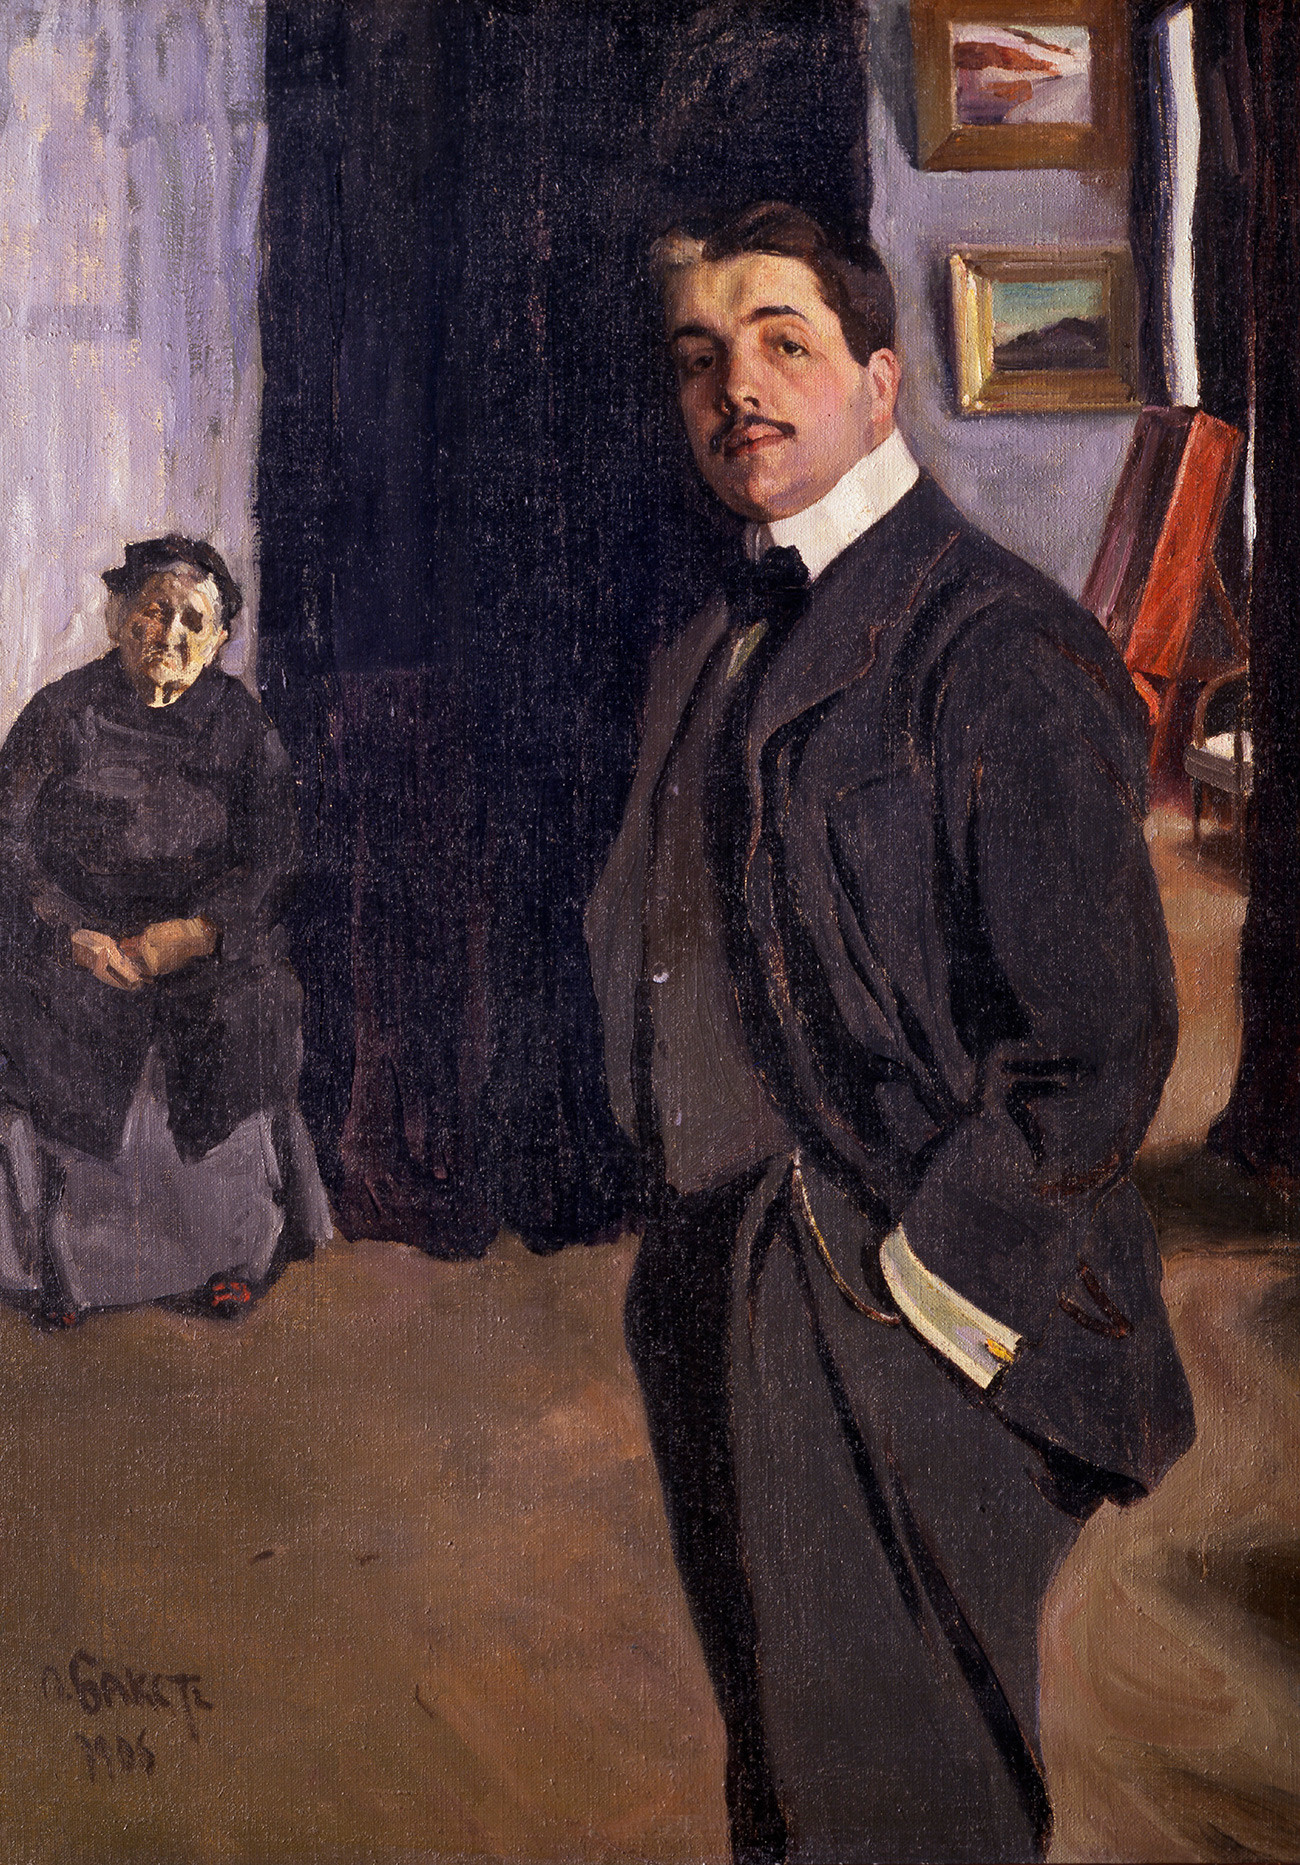 ‘Portrait of Sergei Diaghilev and his Nanny’, 1906